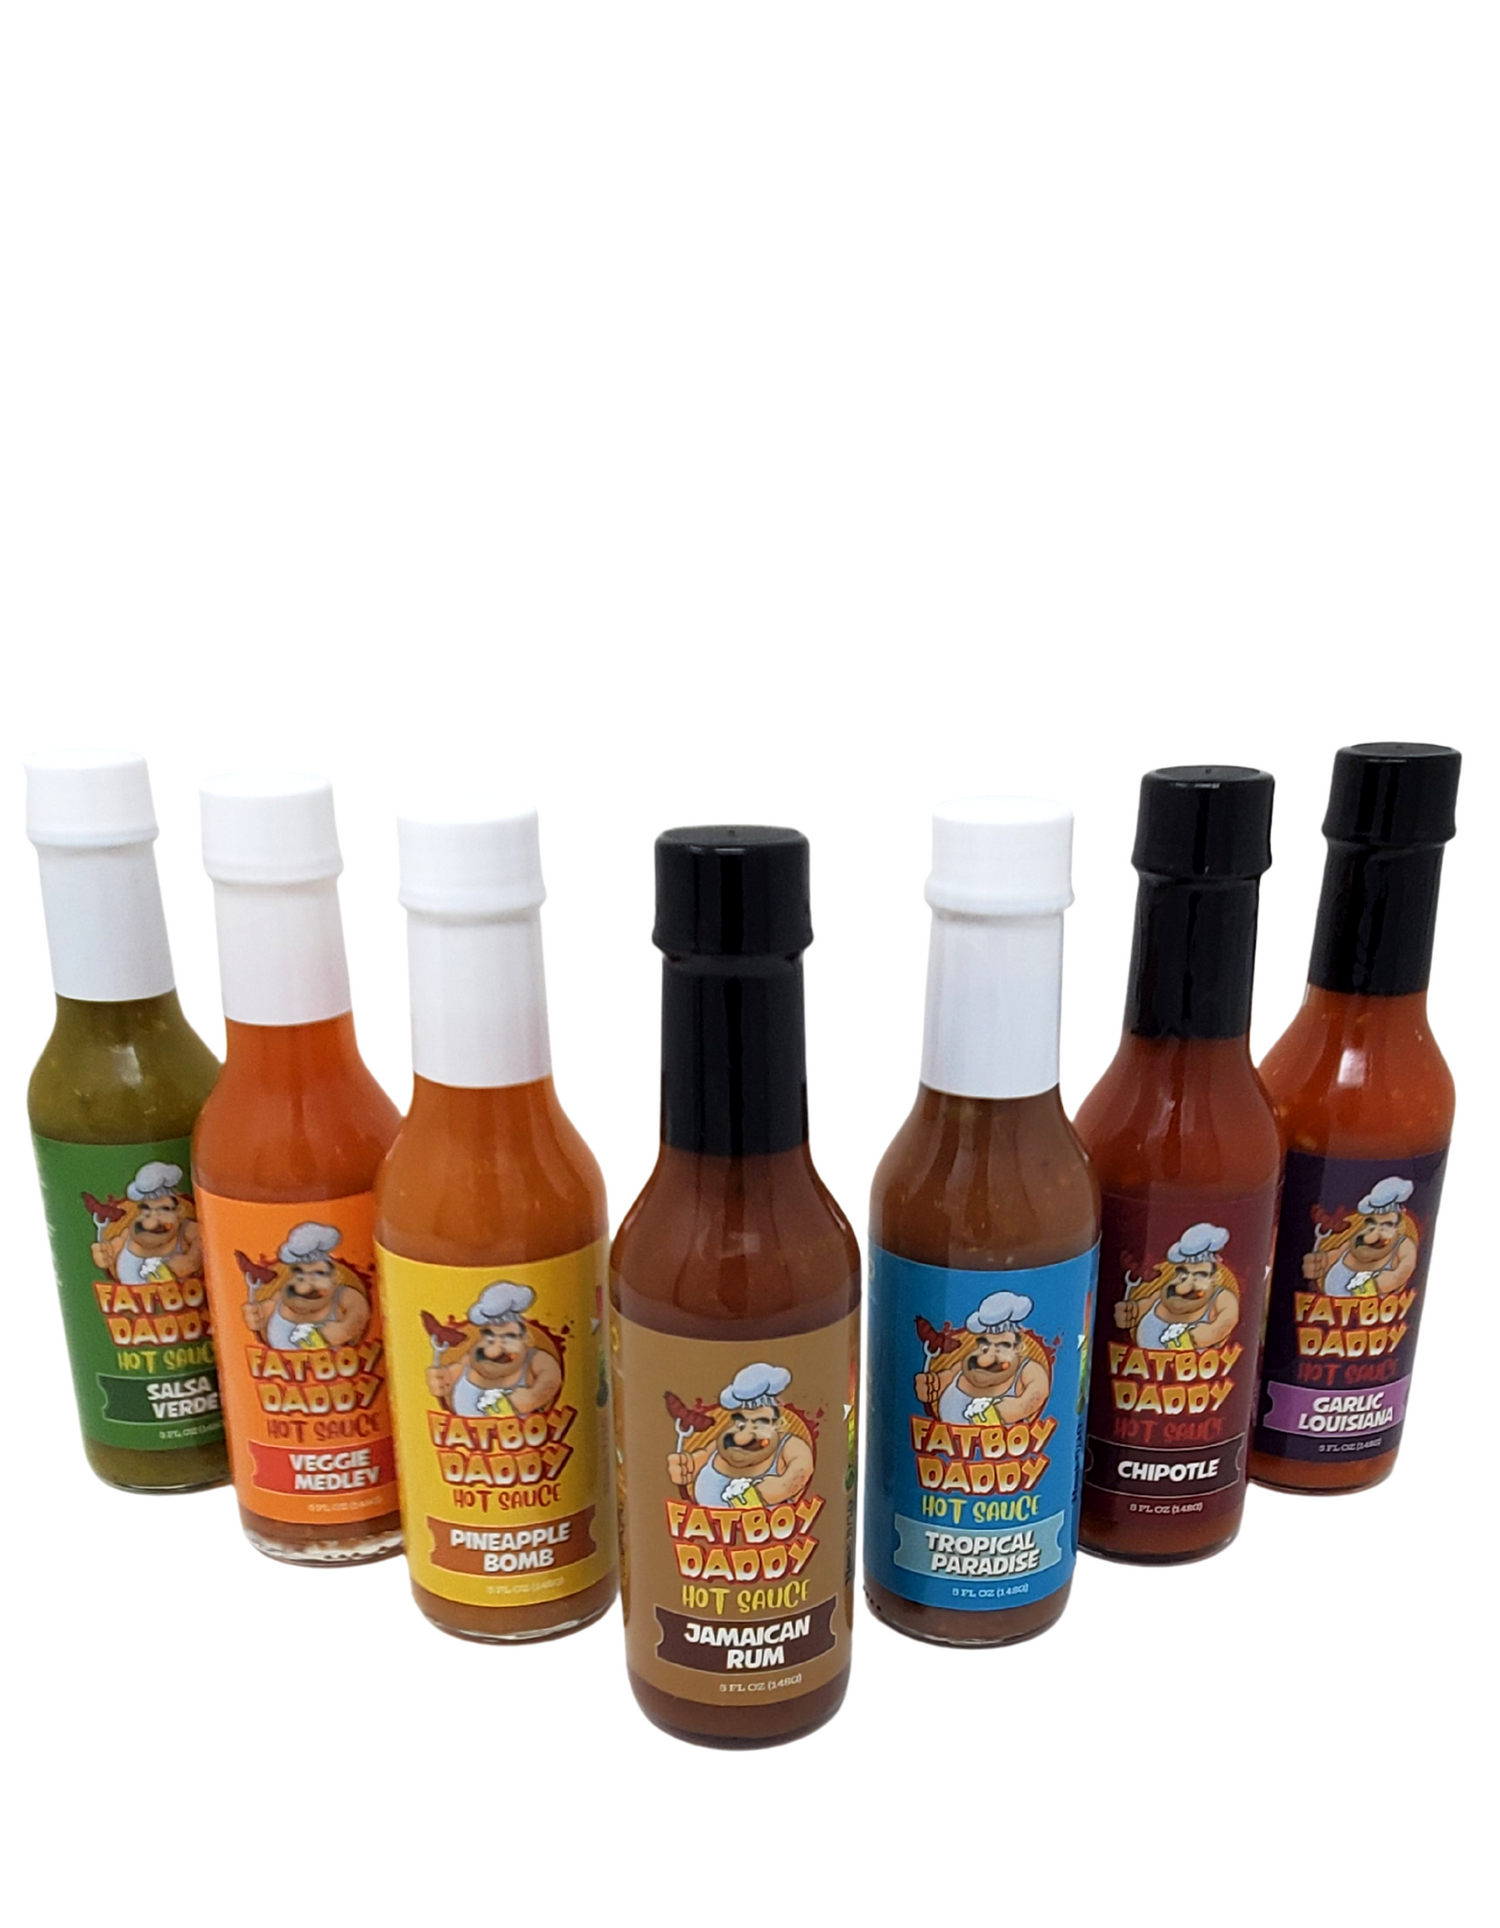 Hot Sauces, Flavored Hot Sauces, corporate gifts, special occasions, hot sauce lovers, foodies